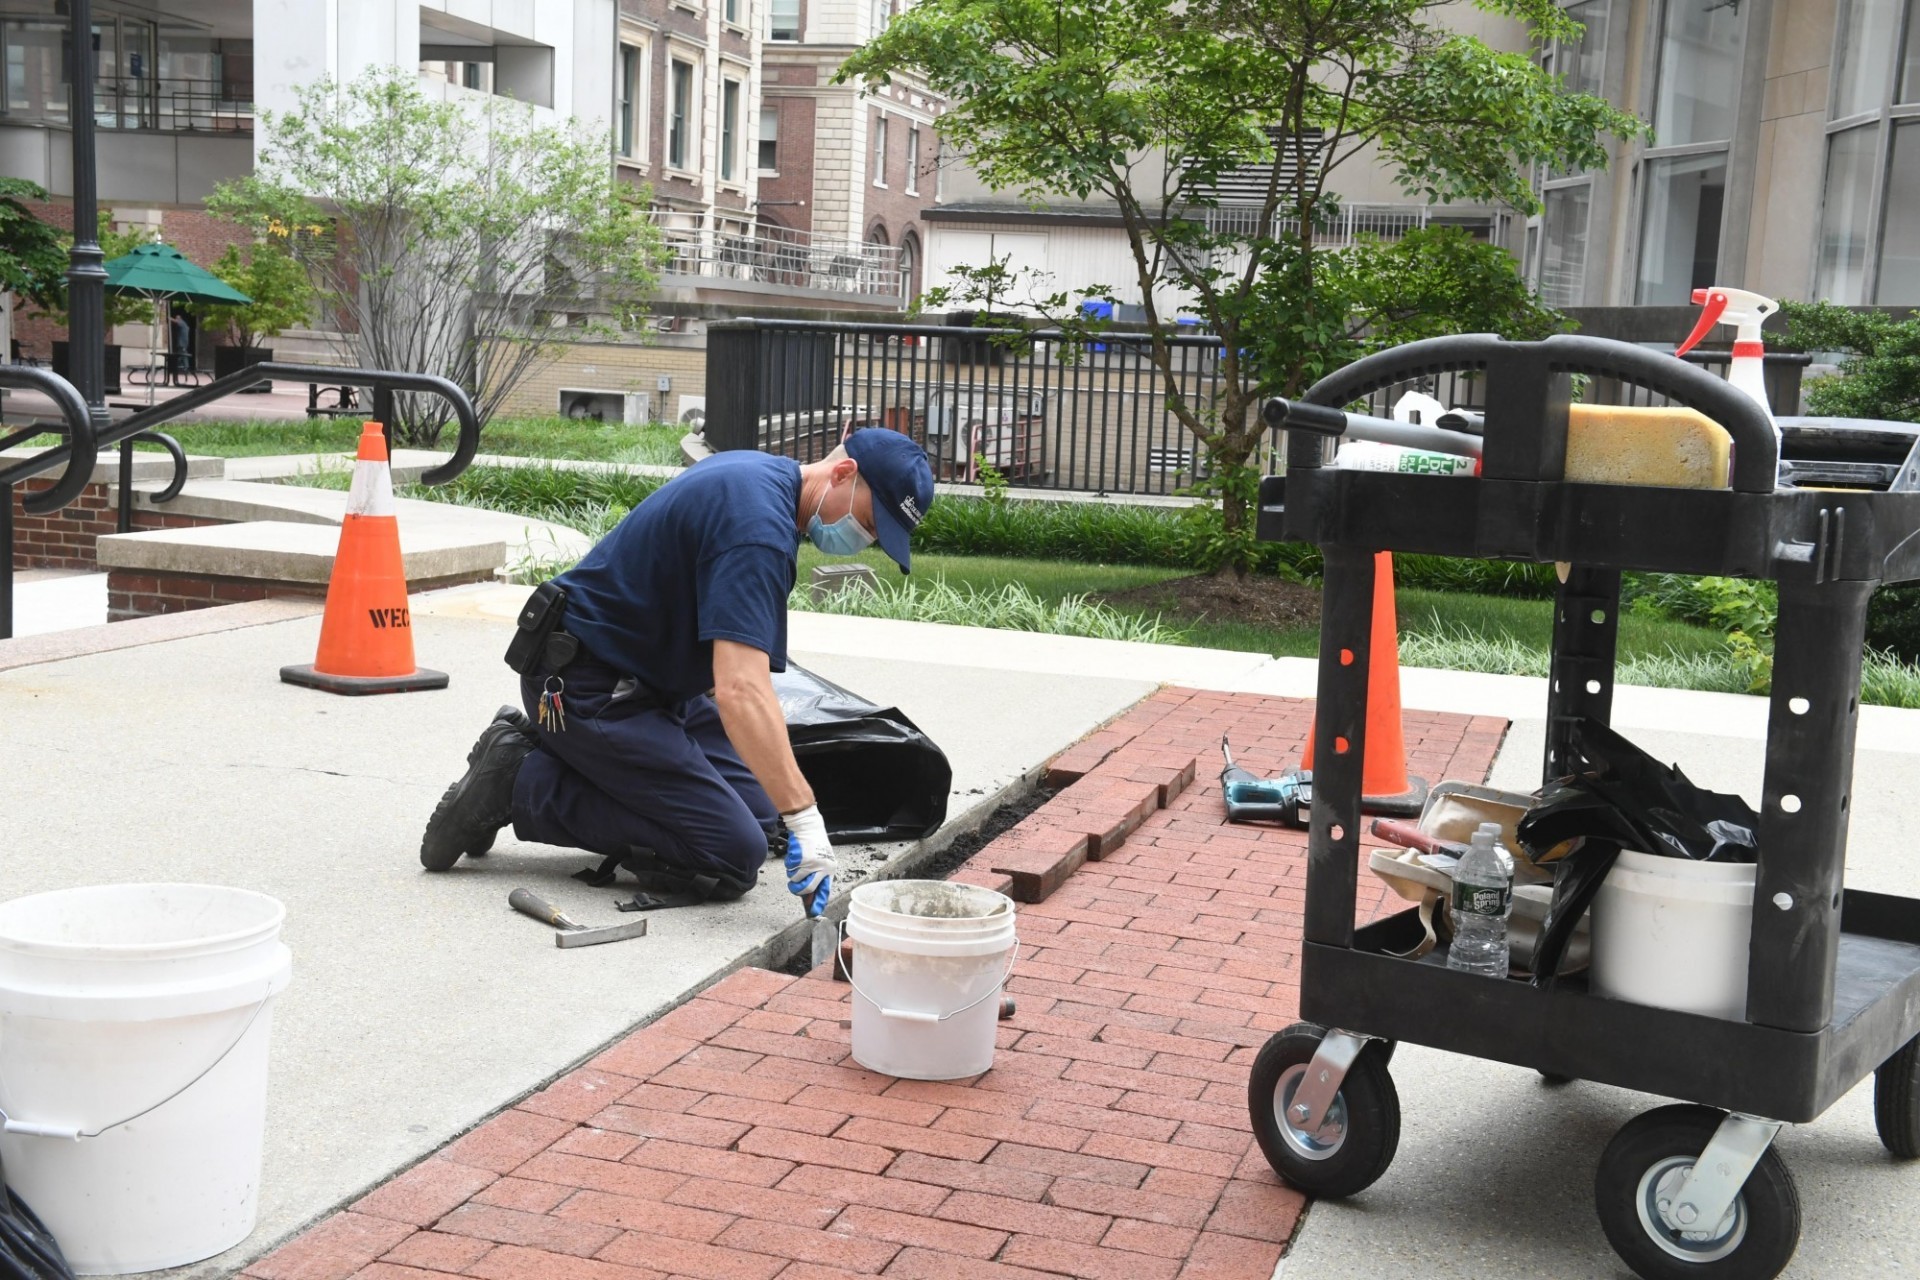 A member of the Facilities and Operations team wearing a dark blue t-shirt and baseball cap is replacing brick pavers in a pathway.